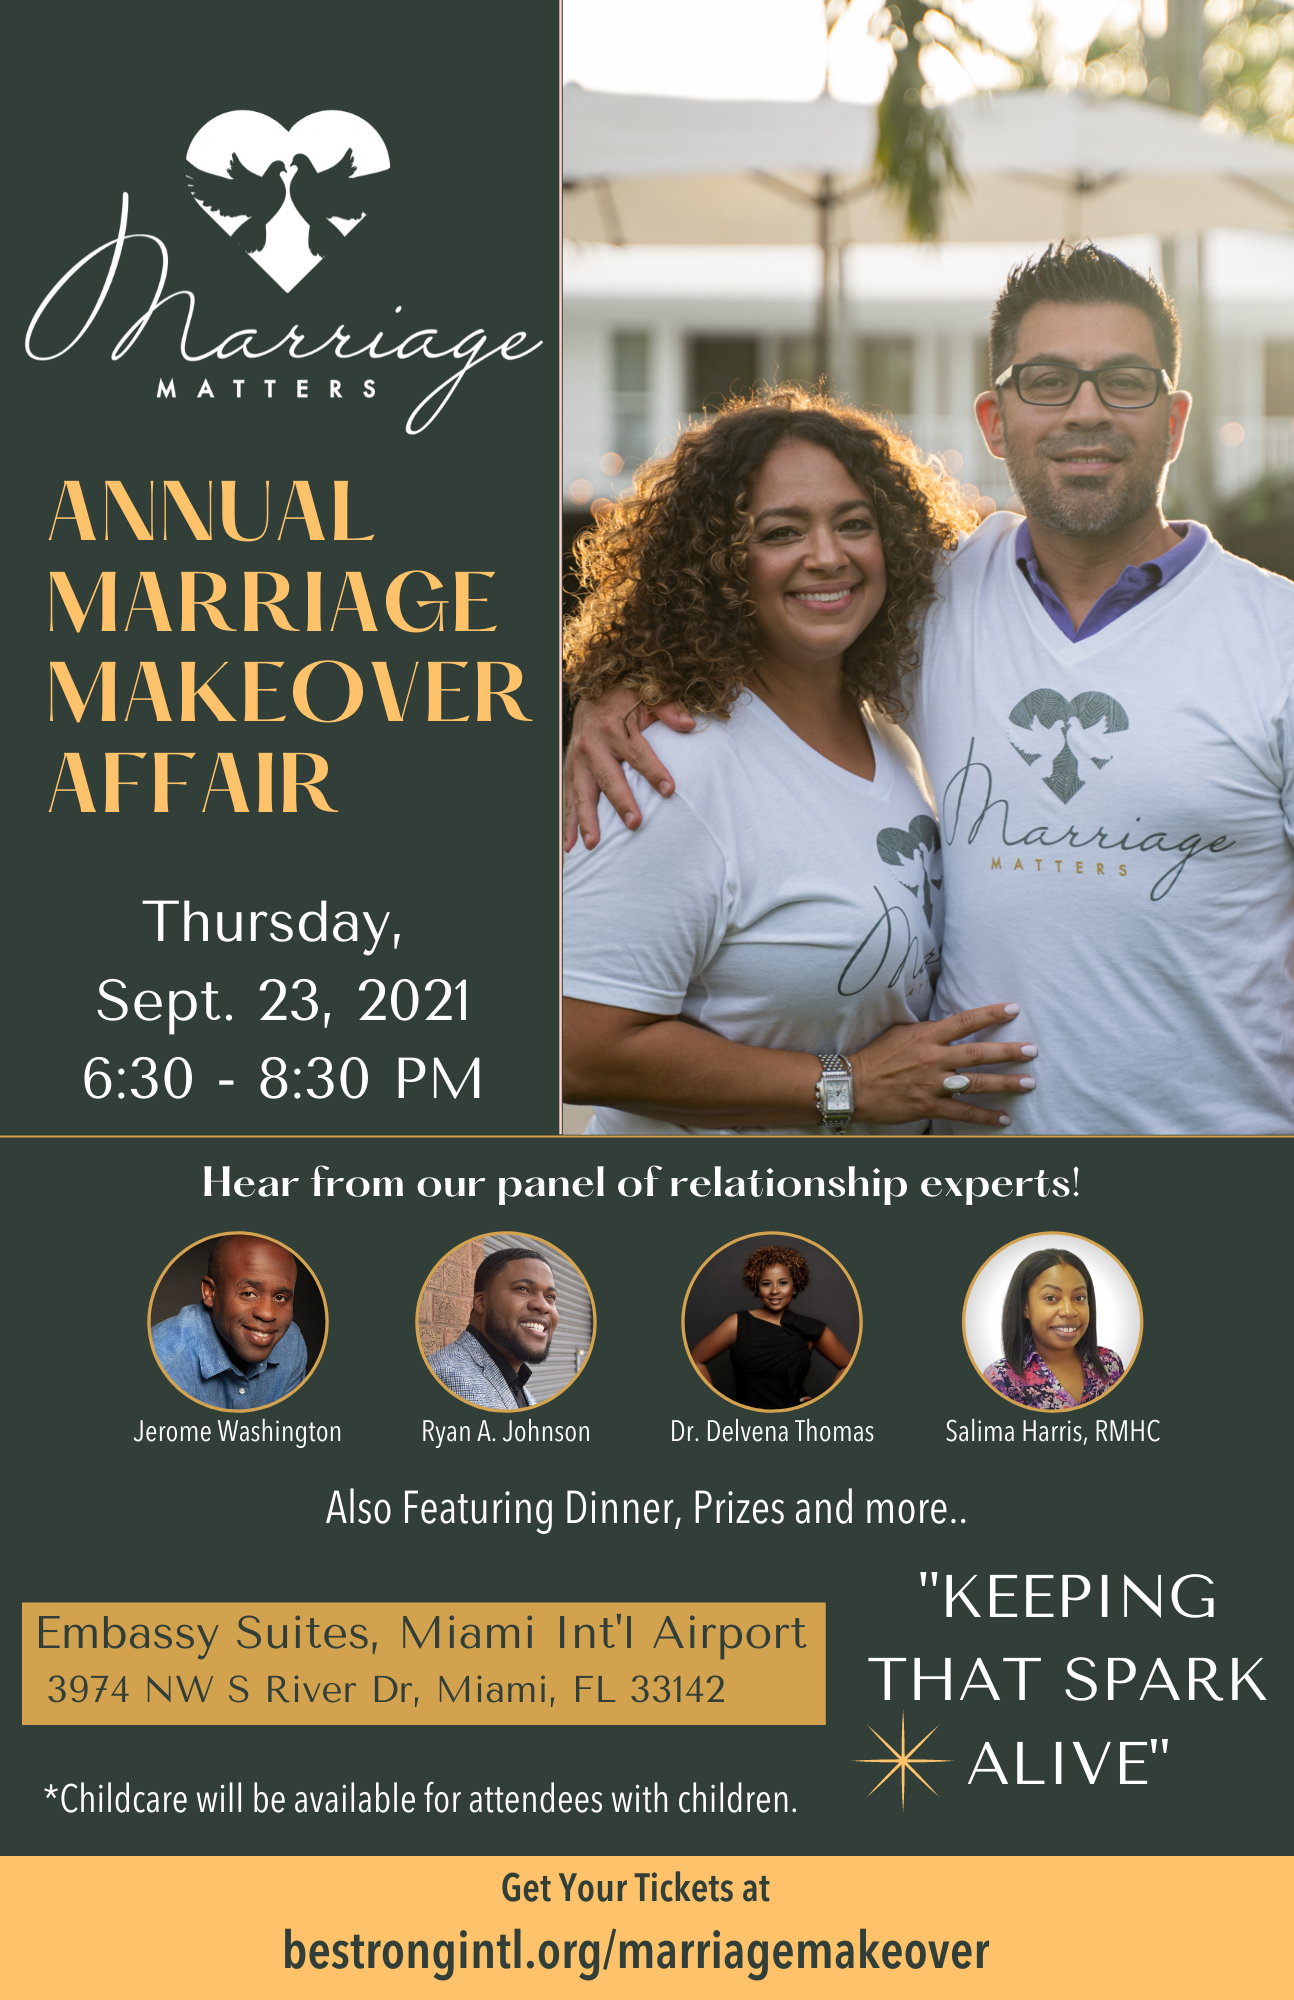 Relationship Experts to Share Insight During Marriage Makeover Affair